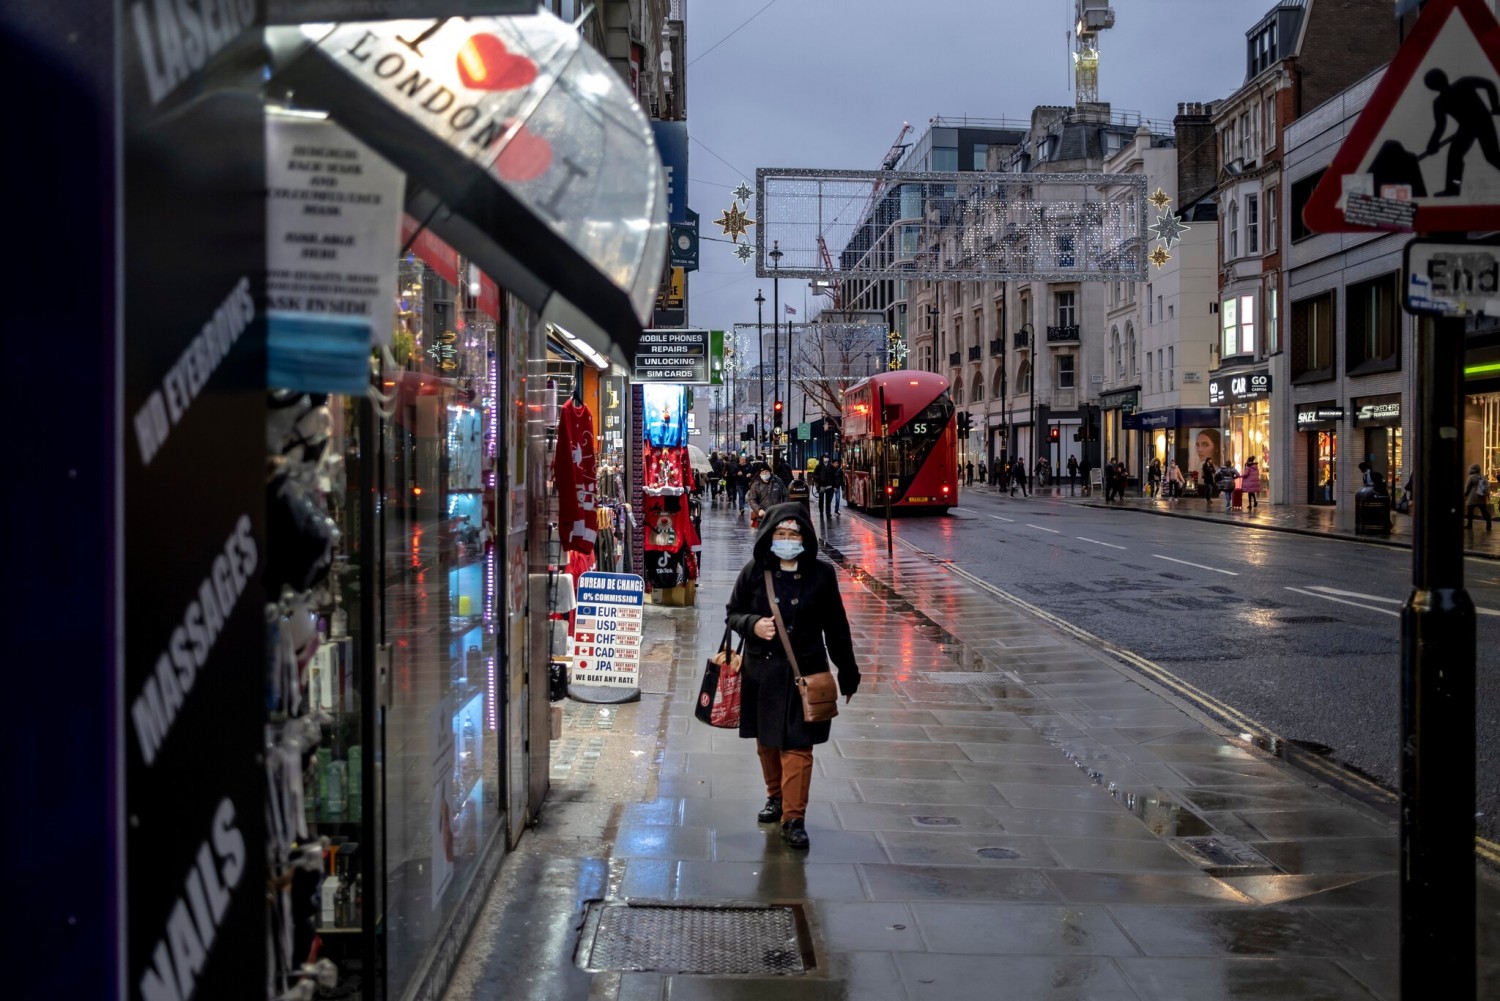 A woman walks on a rain-soaked Oxford Street on the first day of Tier 3 restrictions in London. The city has been moved to even tighter restrictions.Credit...Andrew Testa for The New York Times